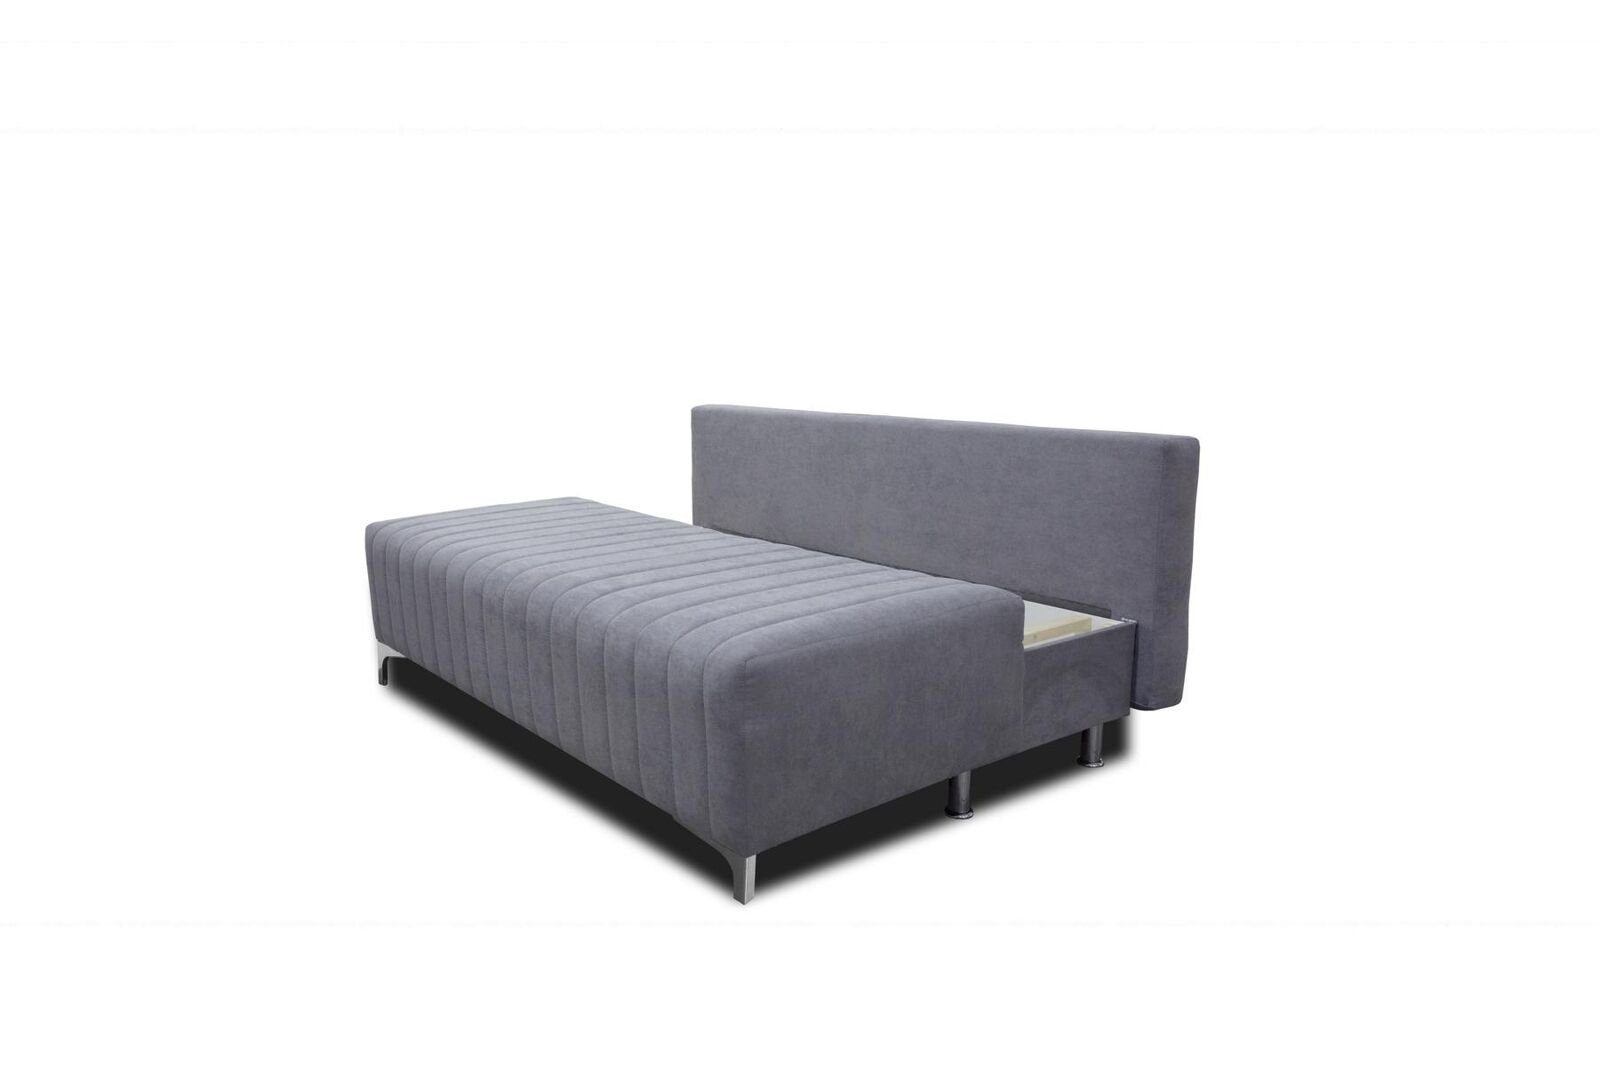 Sofa Lounge 2 Stoff Sofa, Europe JVmoebel Polster Sofa Couch Sitzer Made Design in